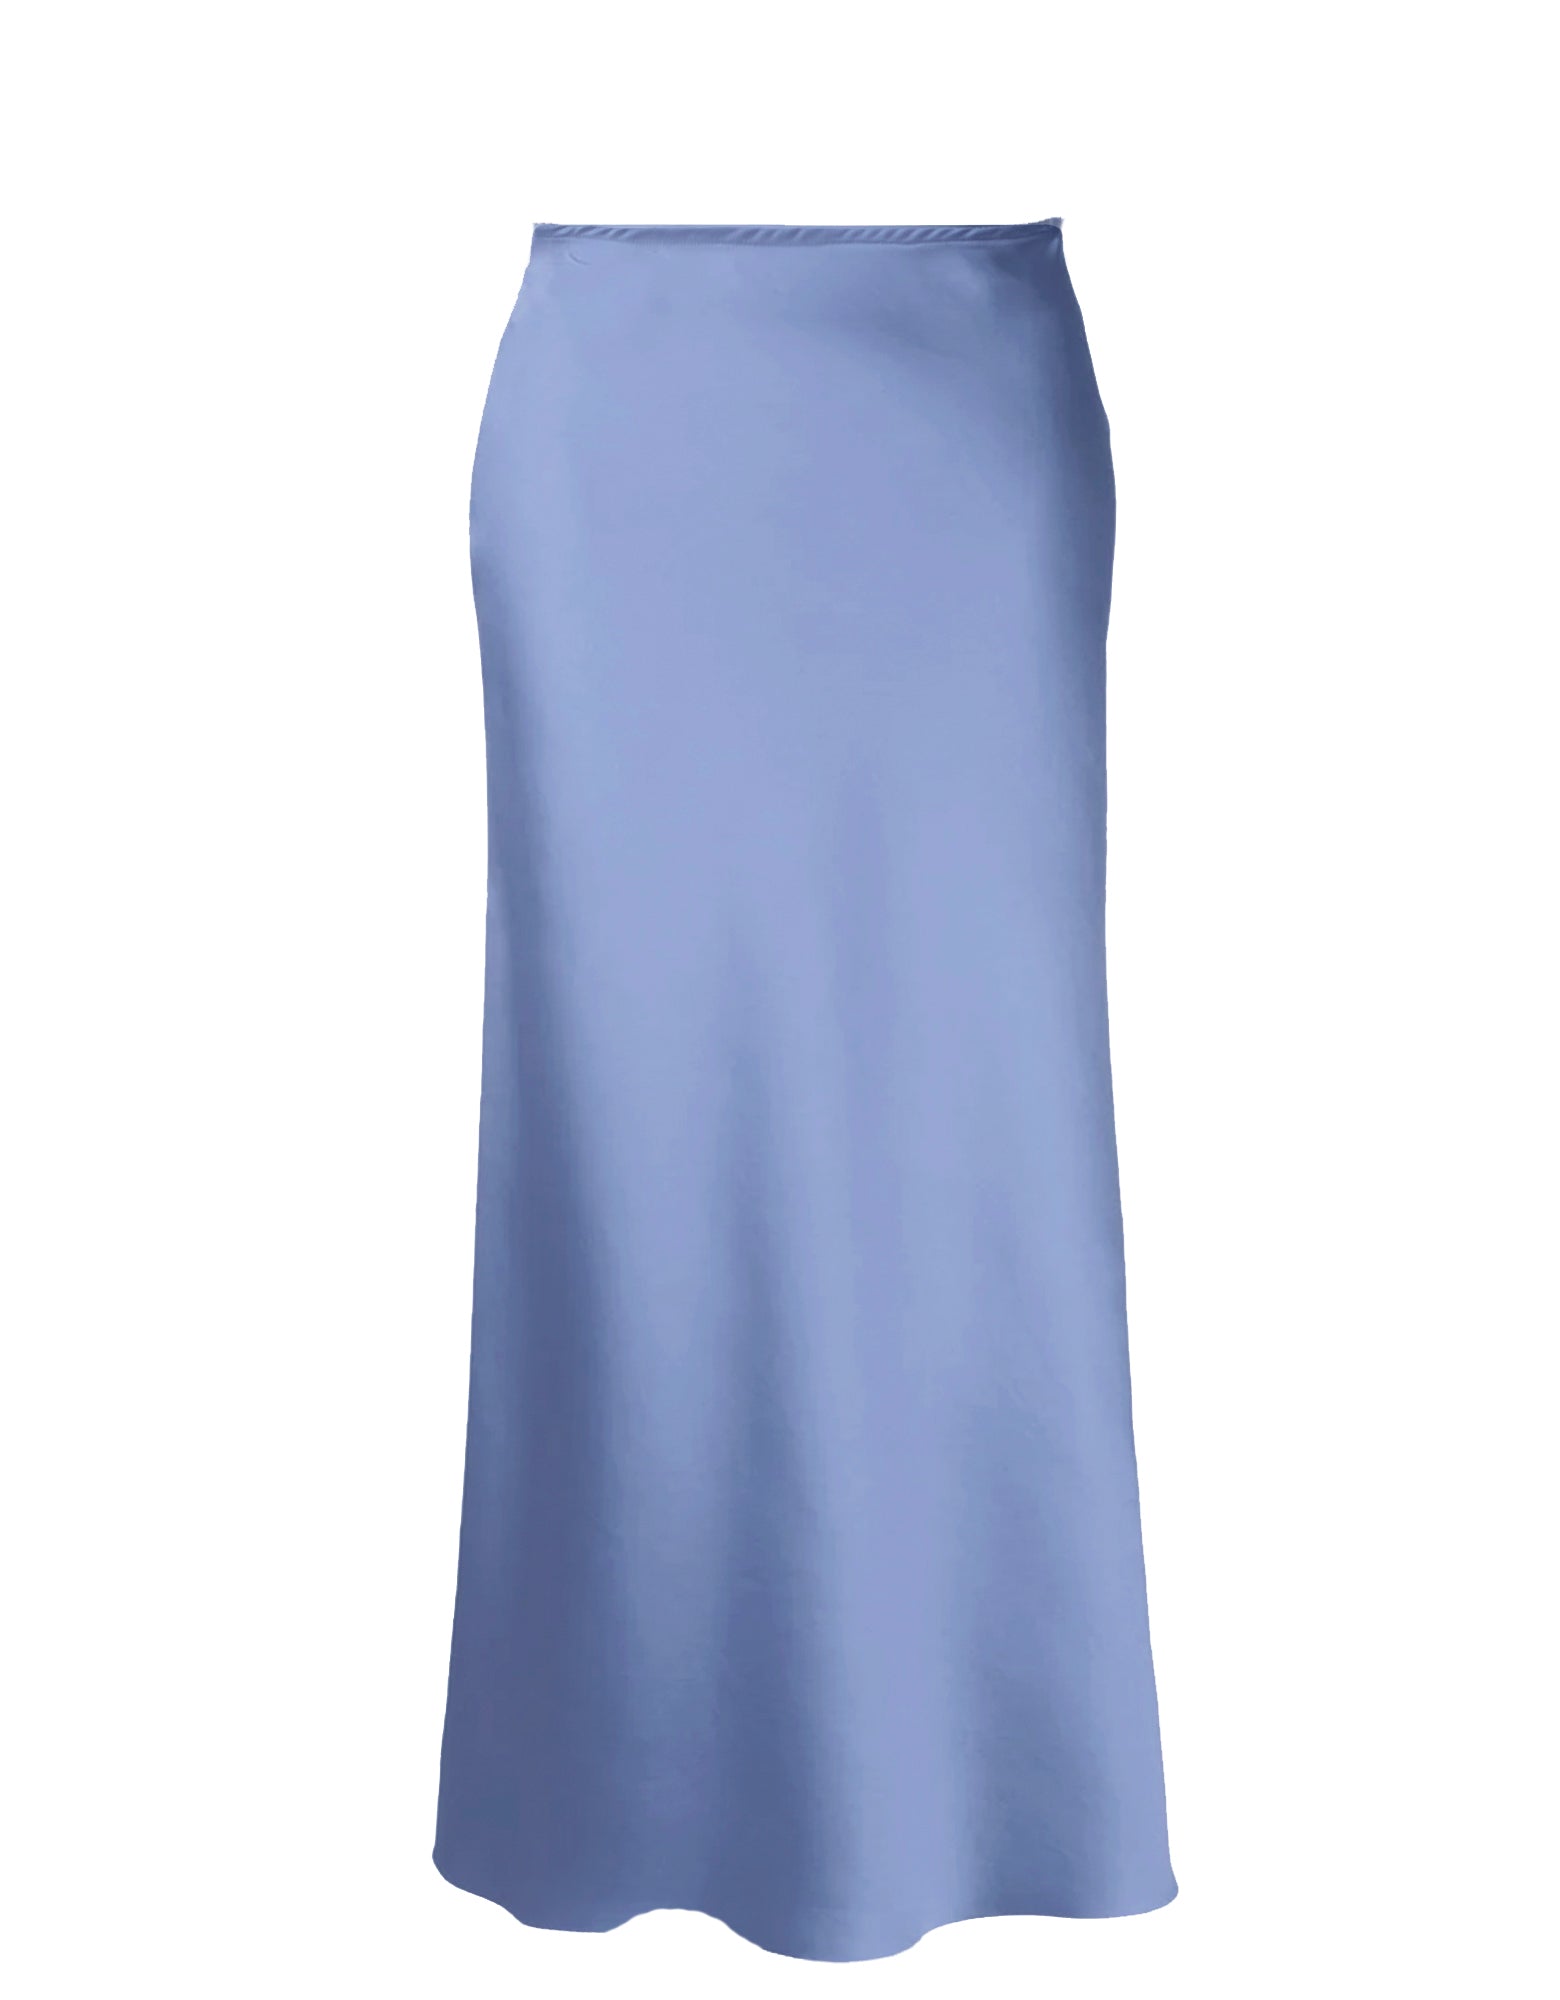 flat of the coppen blue skirt